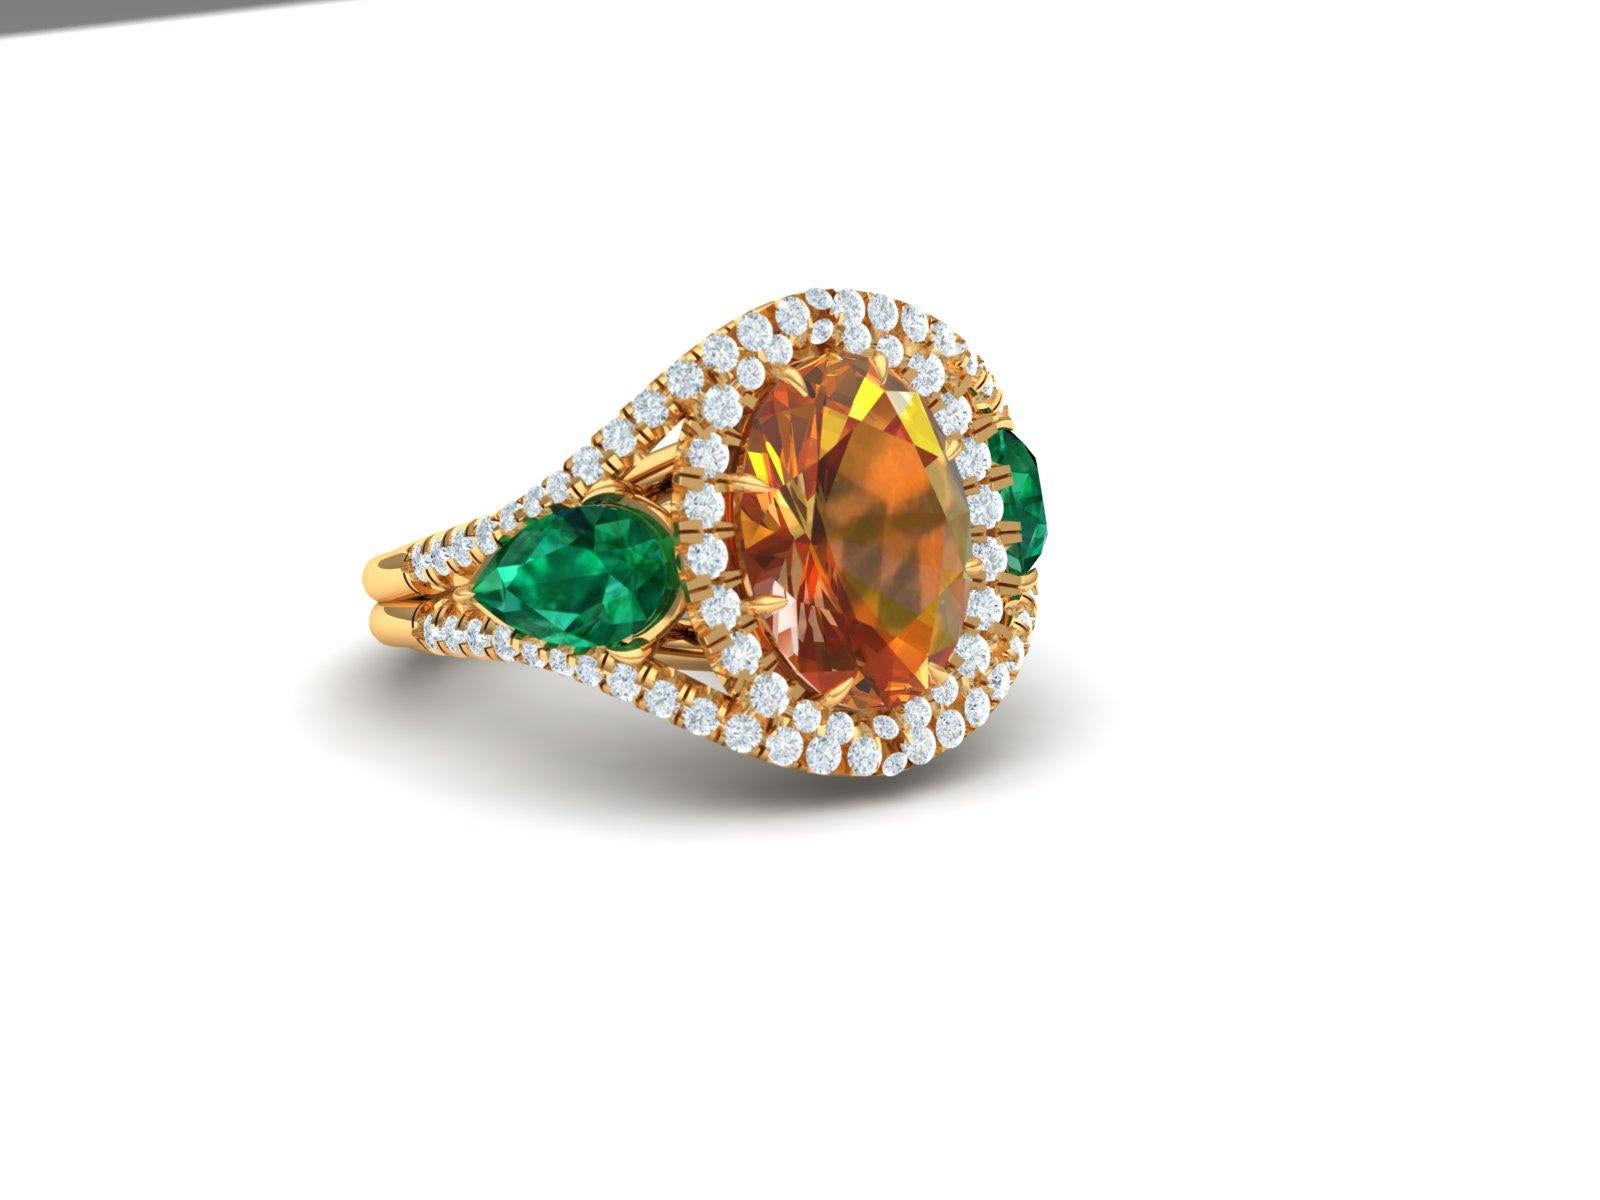 A classic combination of rich golden yellow orange browns can be seen in this oval cut Citrine which weighs 2.5 carats.  This stunner of a center stone is flanked by two twinning Pear shape green emeralds.  Each emerald weighs apprx. .40-.55 carats.